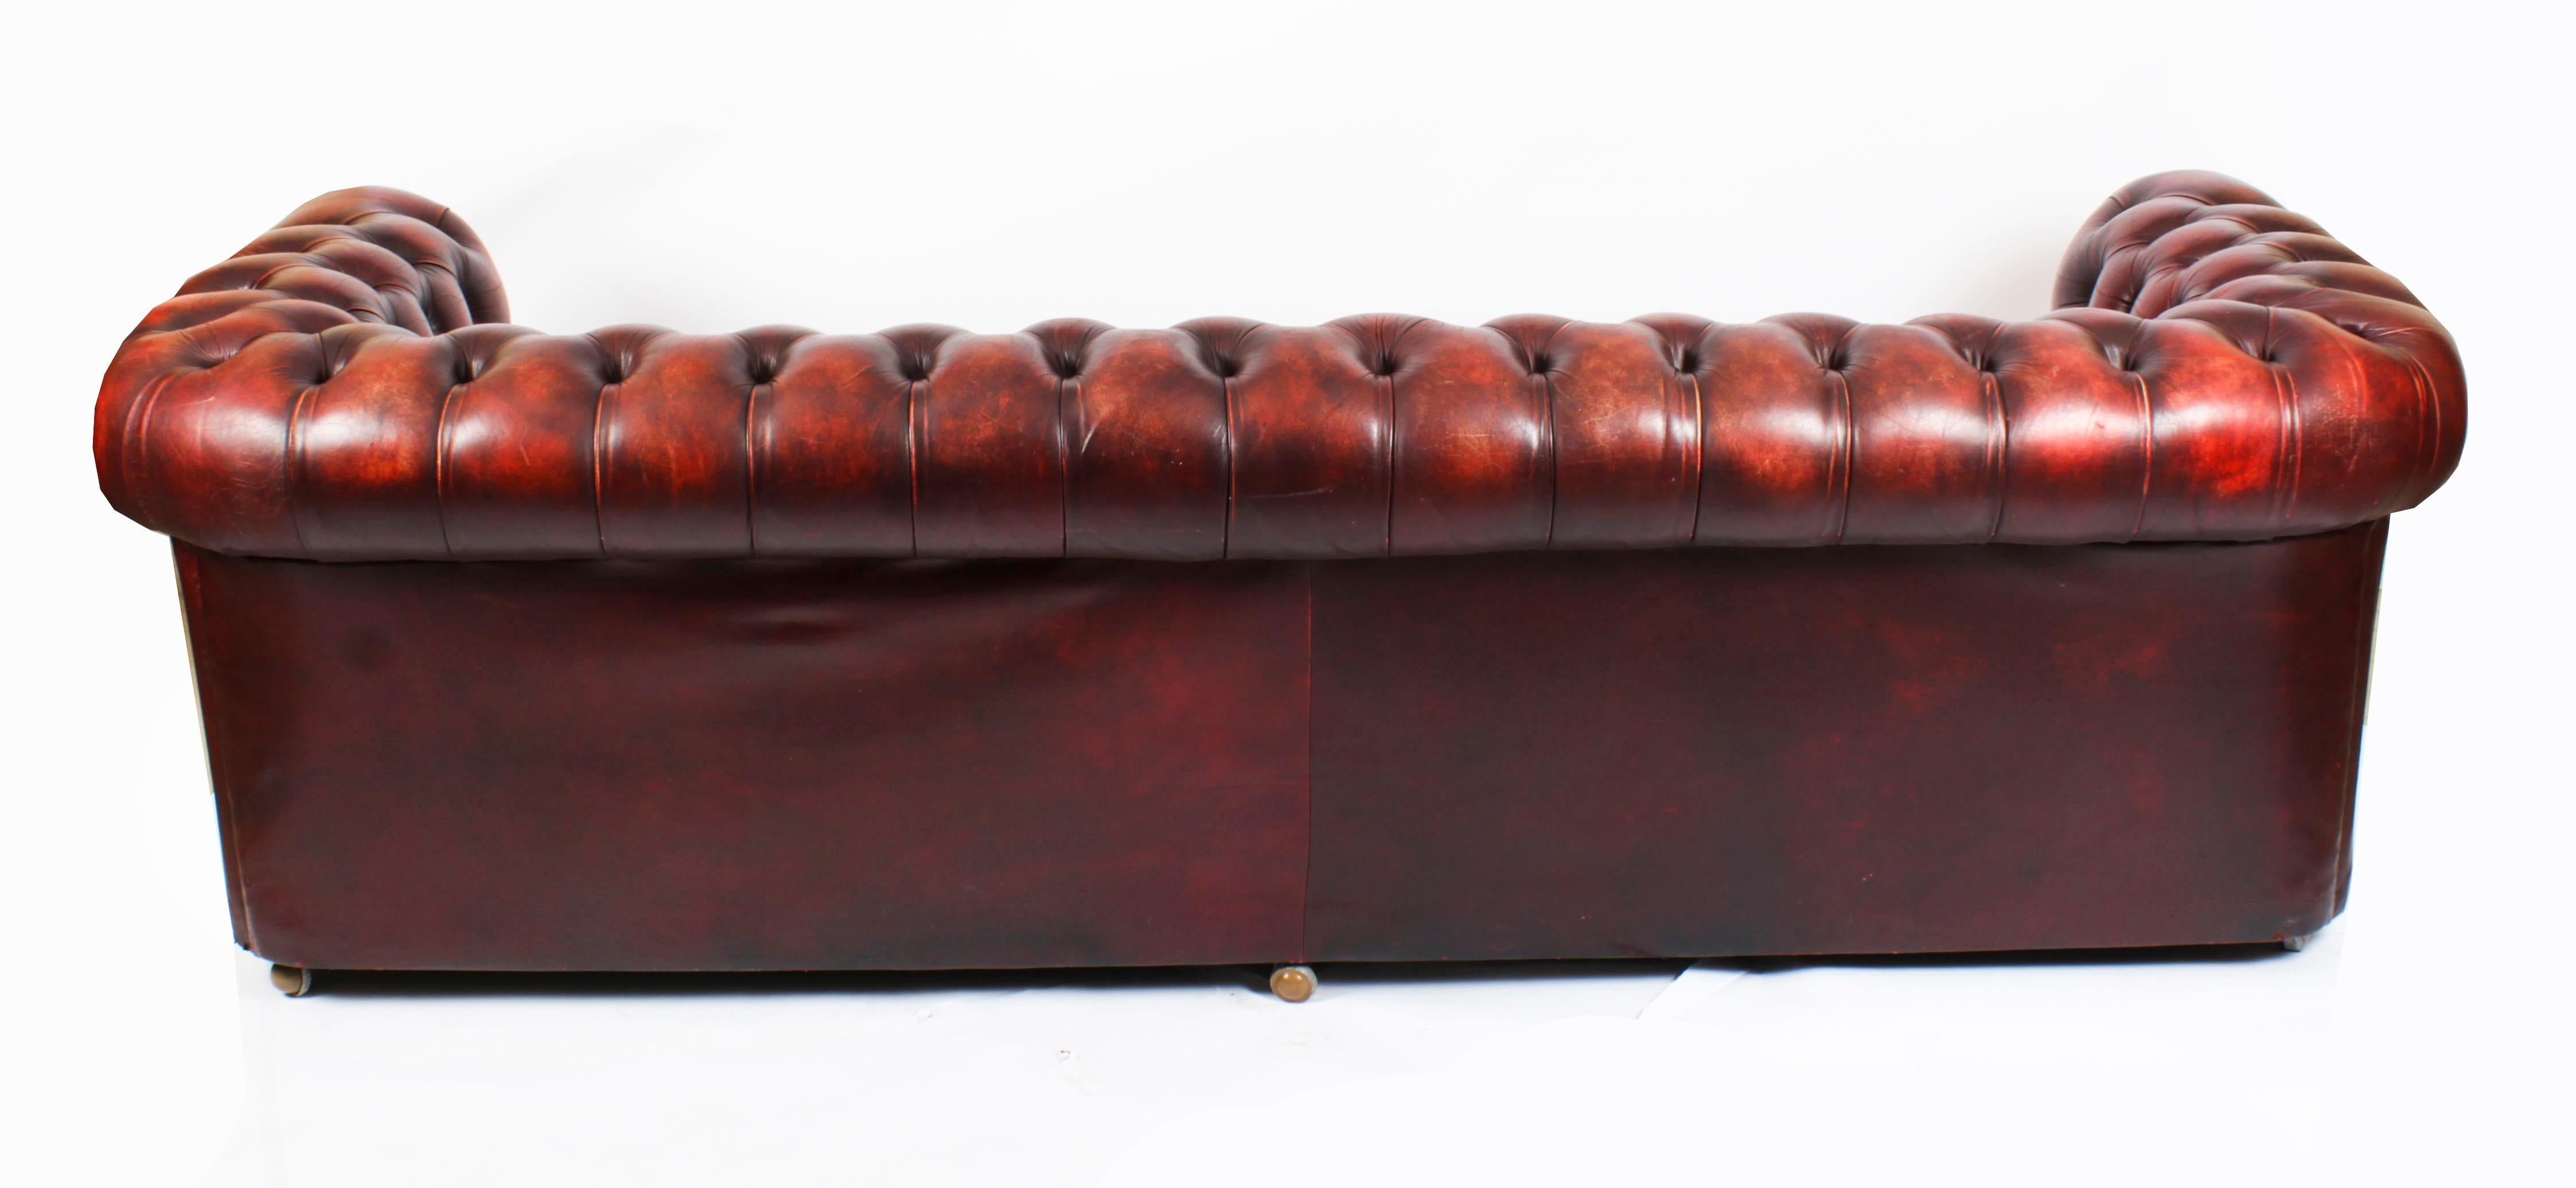 Vintage English Button Back Leather Chesterfield Sofa Mid-20th C 15